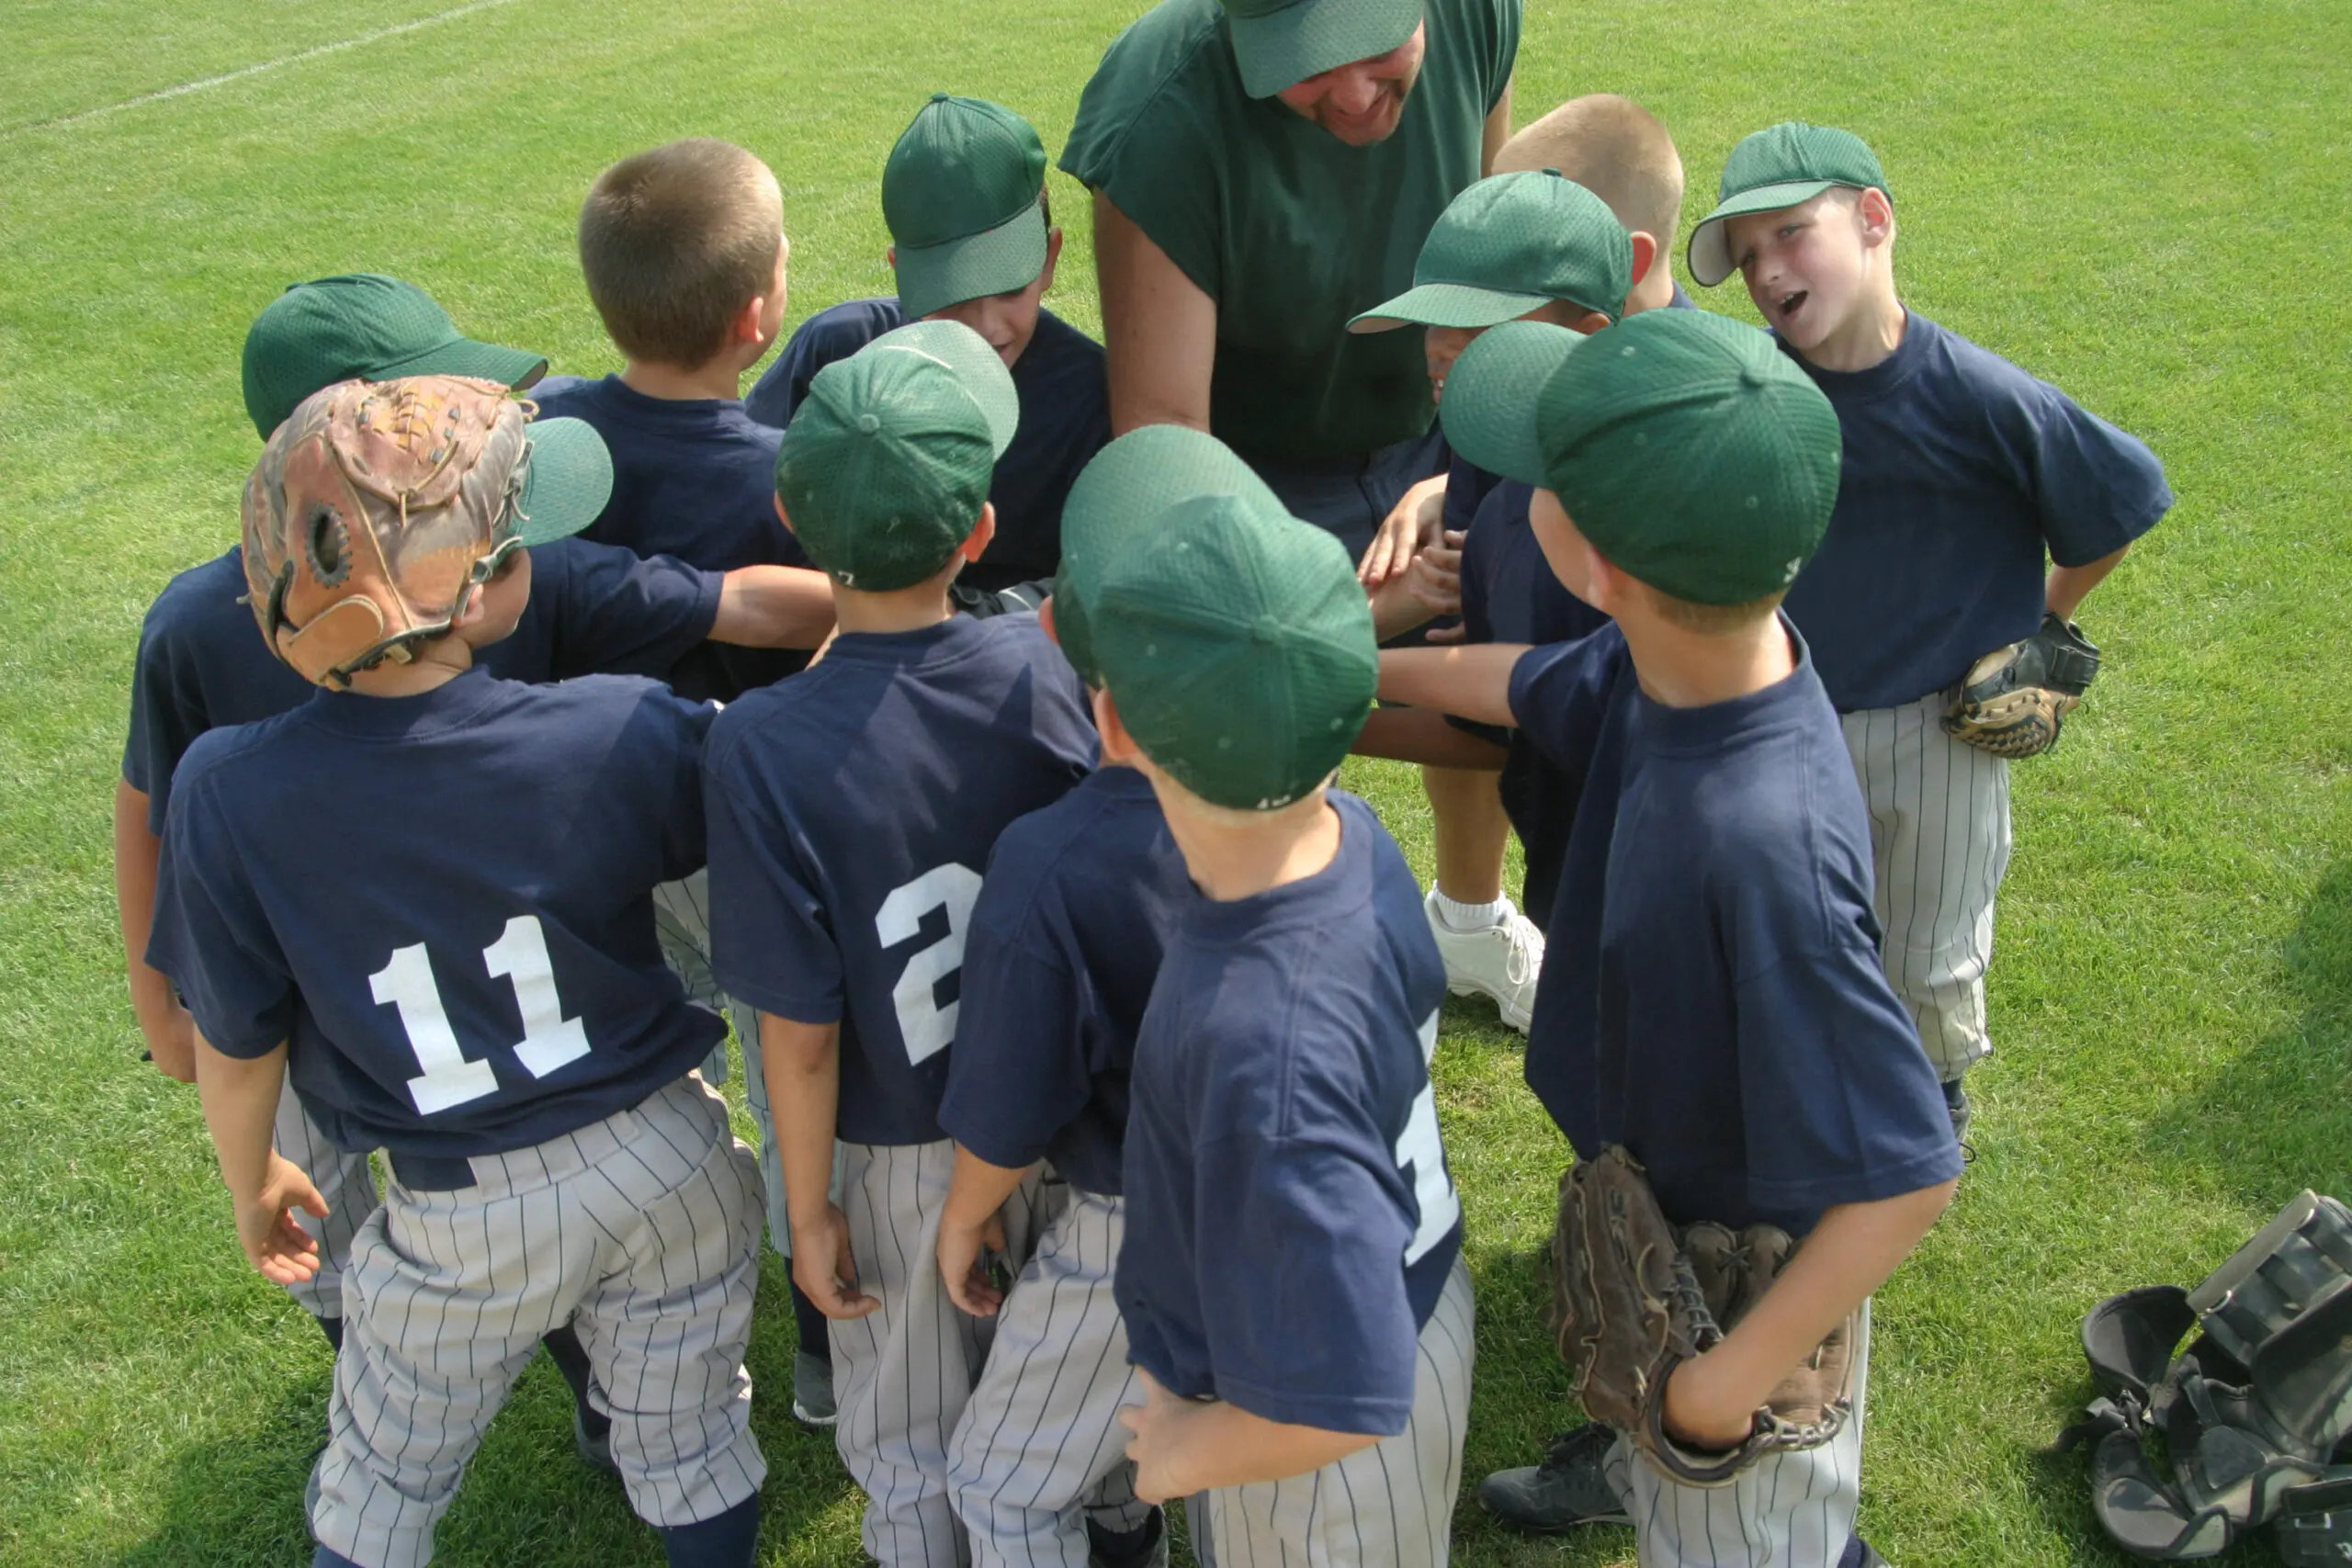 Featured image: How To Choose the Right Baseball Management Software for Your Youth Sports Club